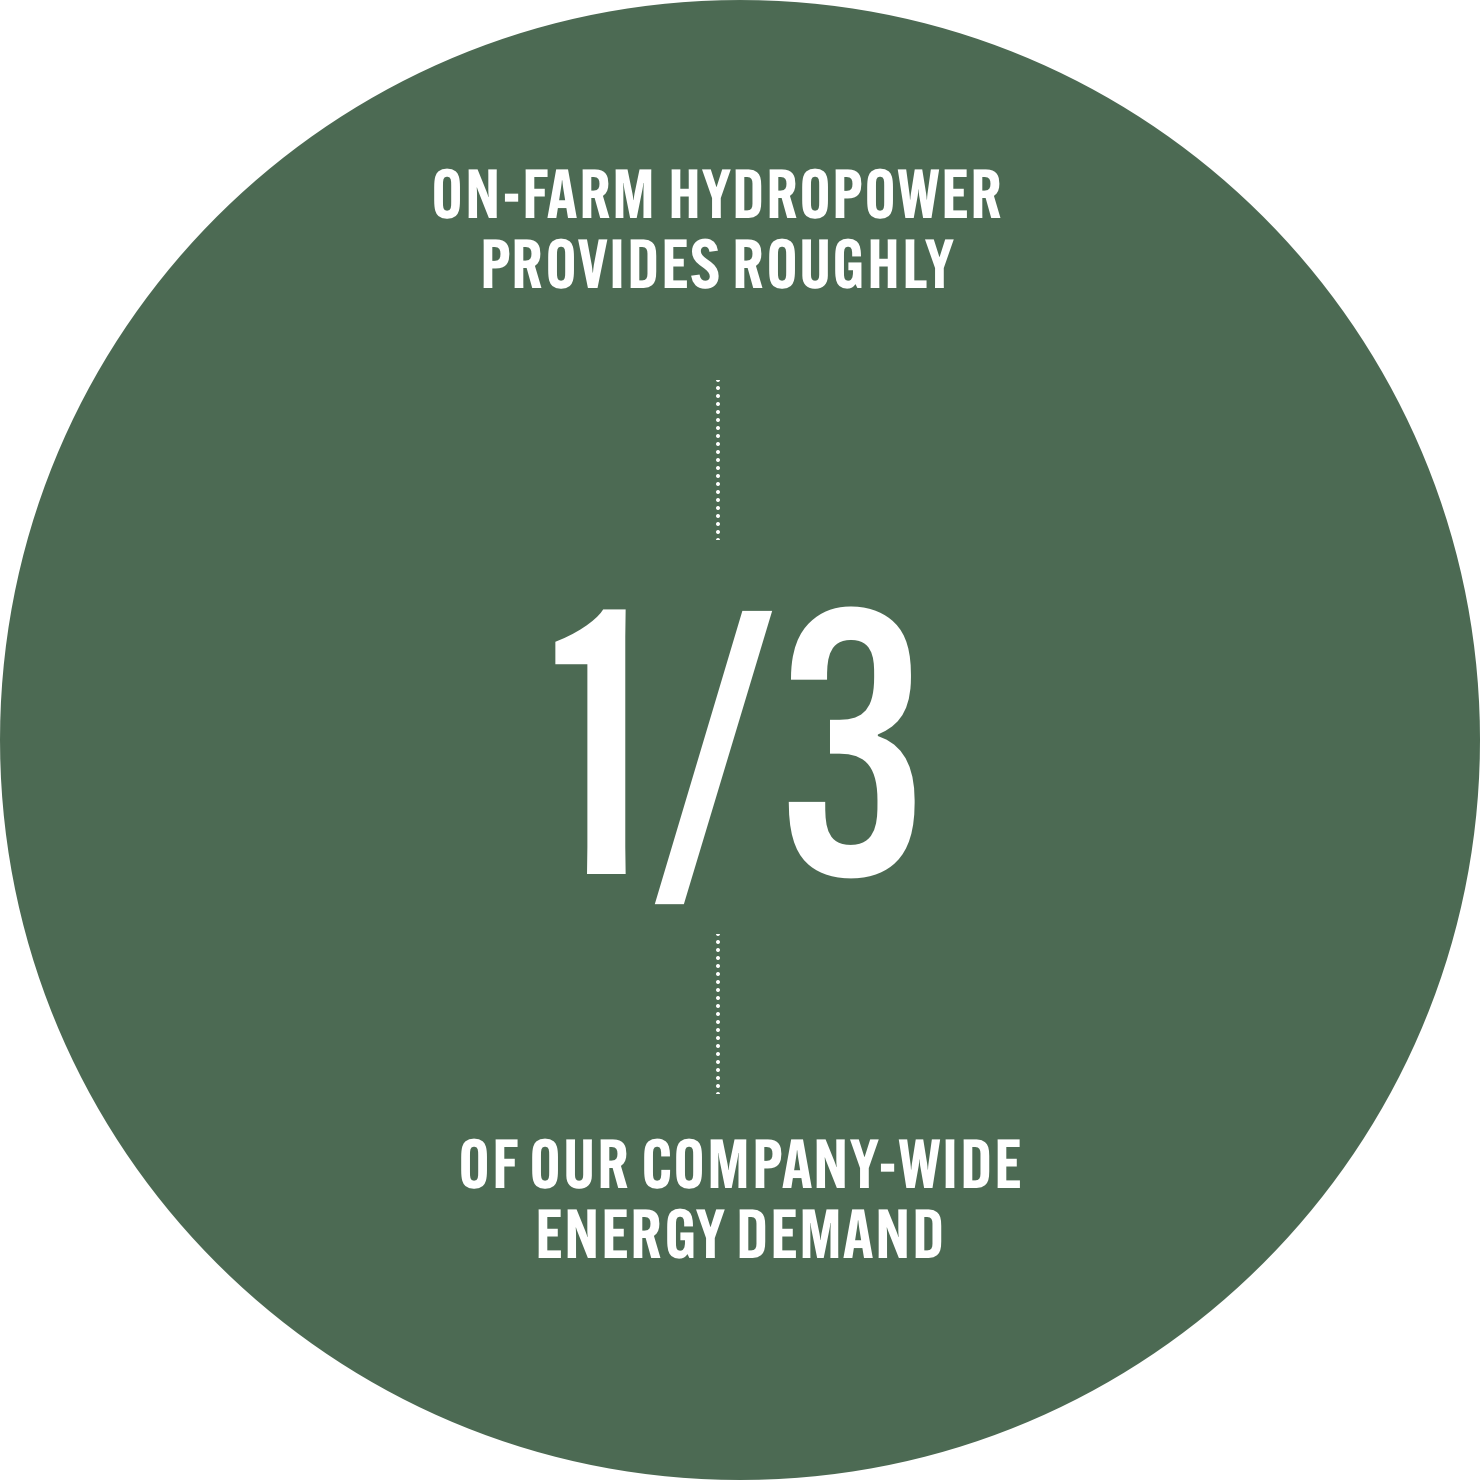 On-farm hydropower provides roughtly 1/3 of our company-wide energy demand